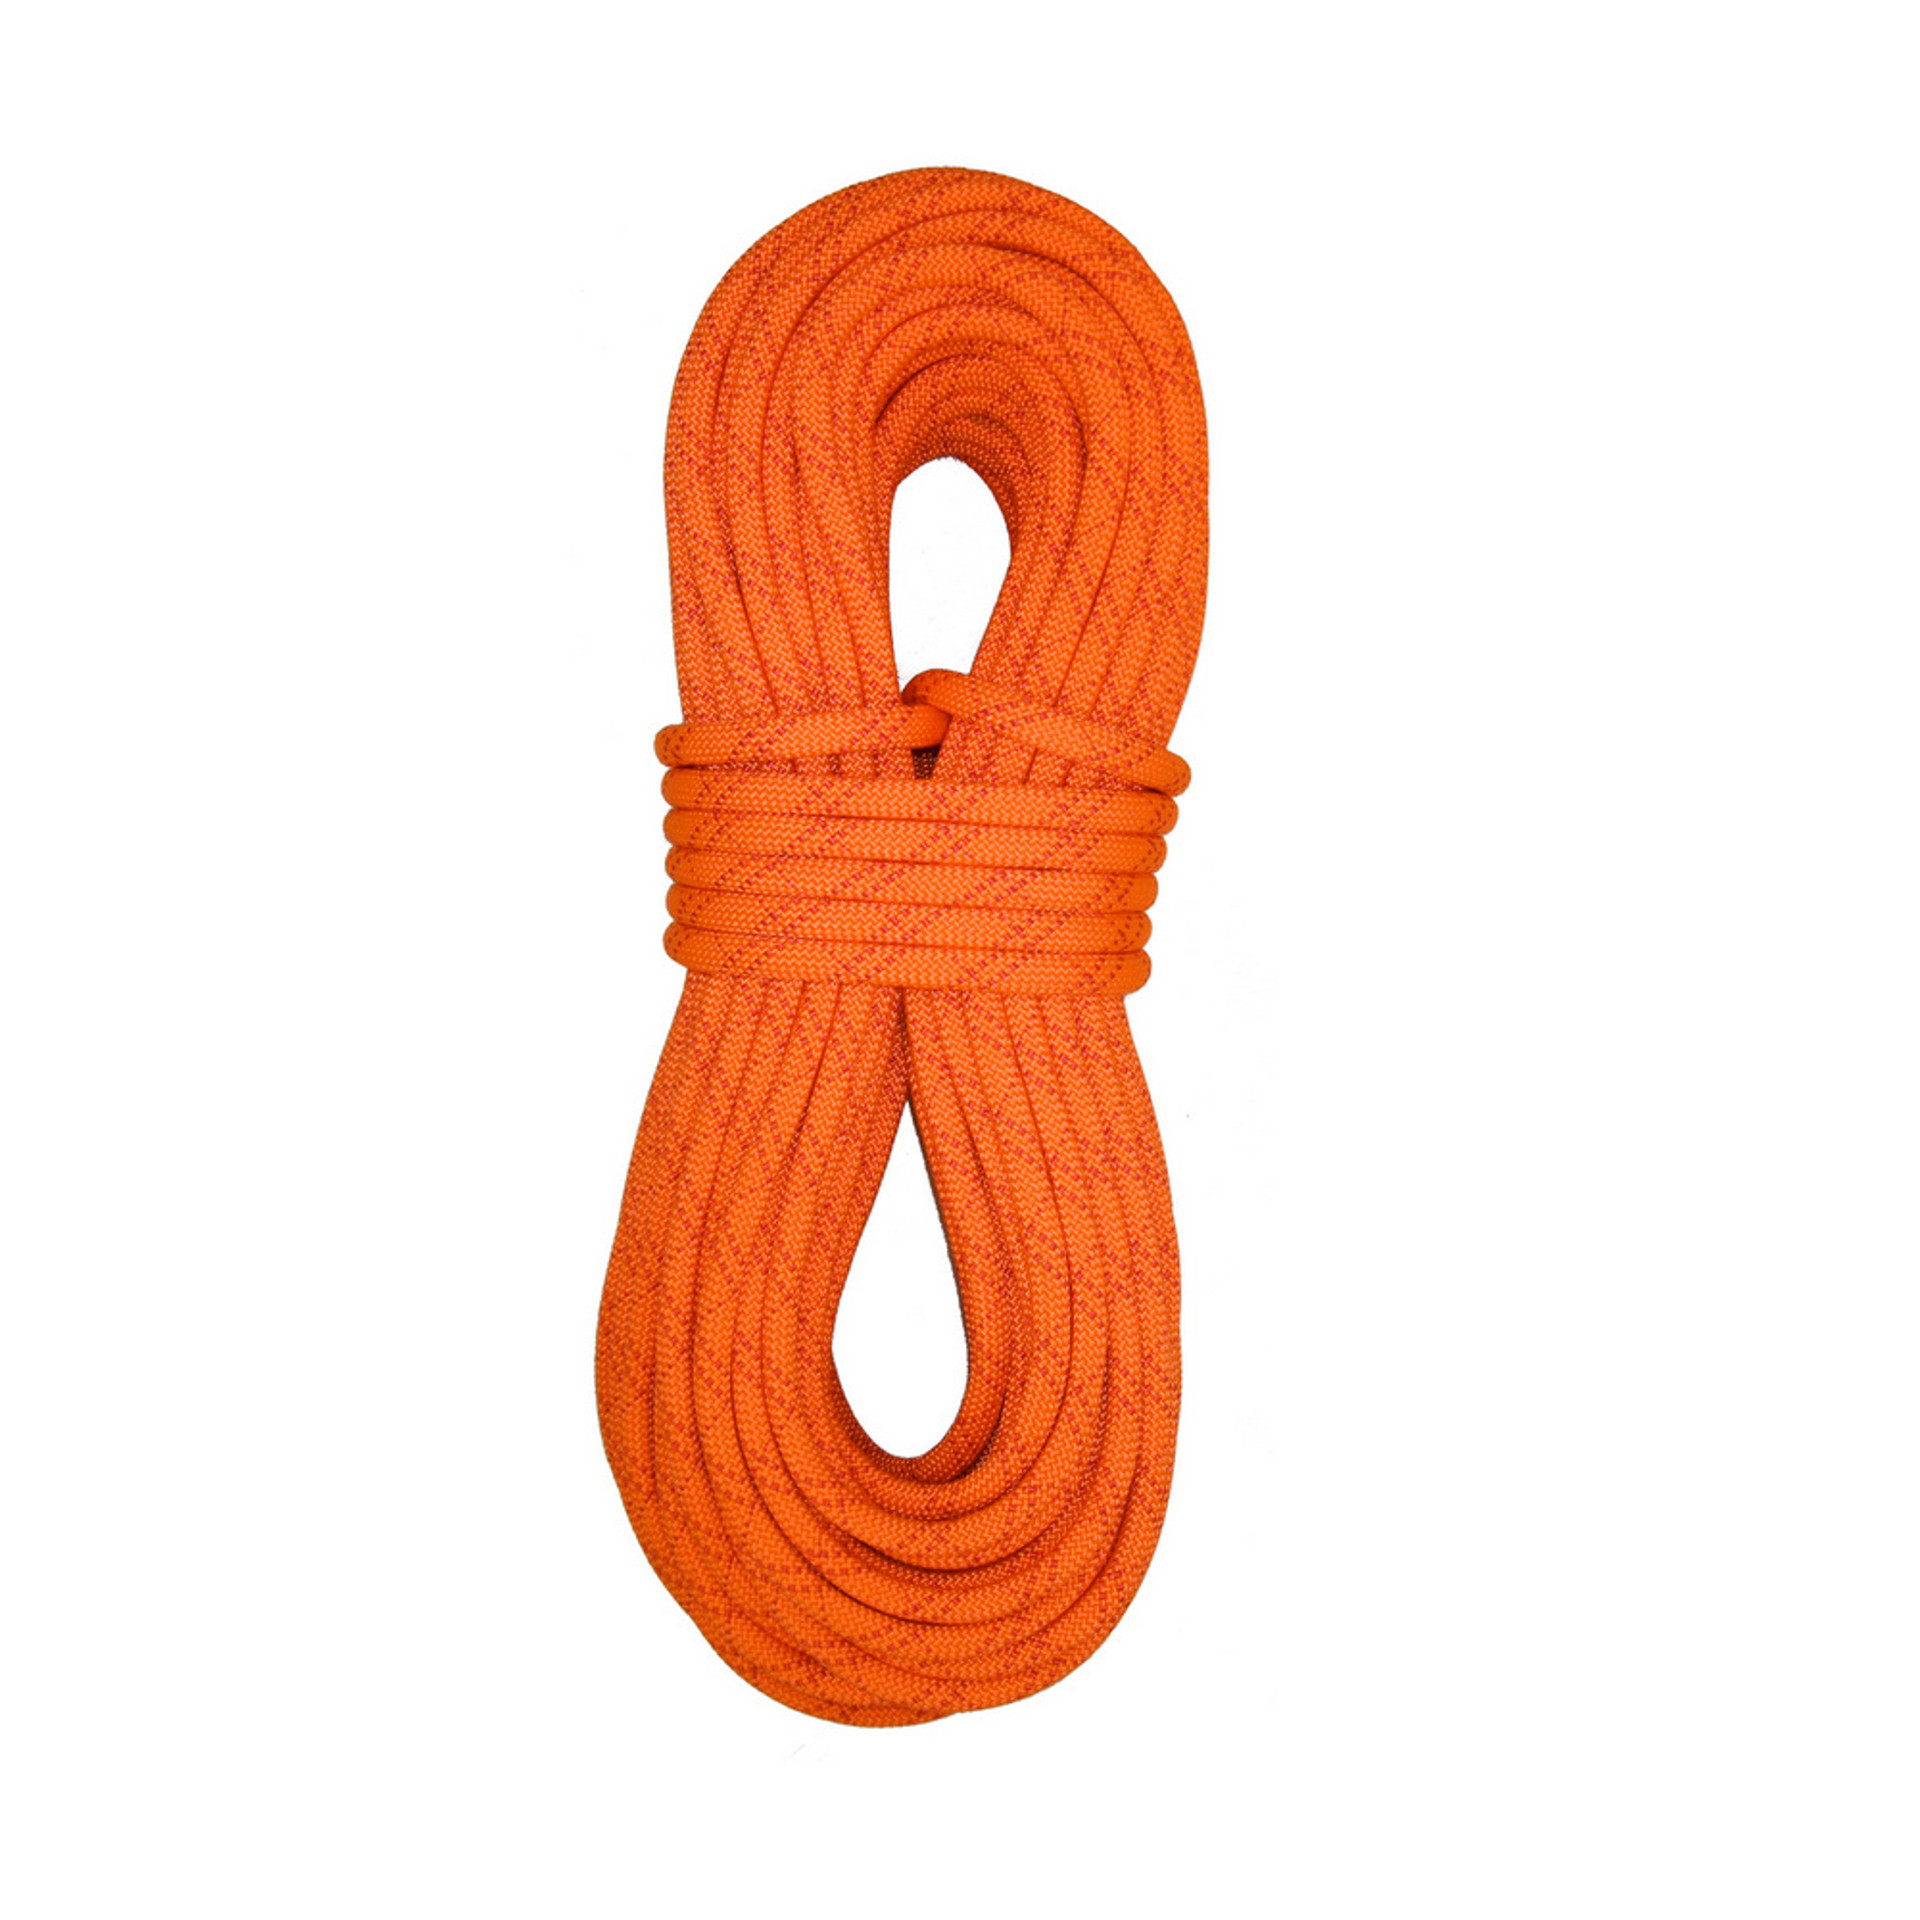 Kernmantle ropes static , dynamic and floating ropes for rescue,  rappelling, rock climbing